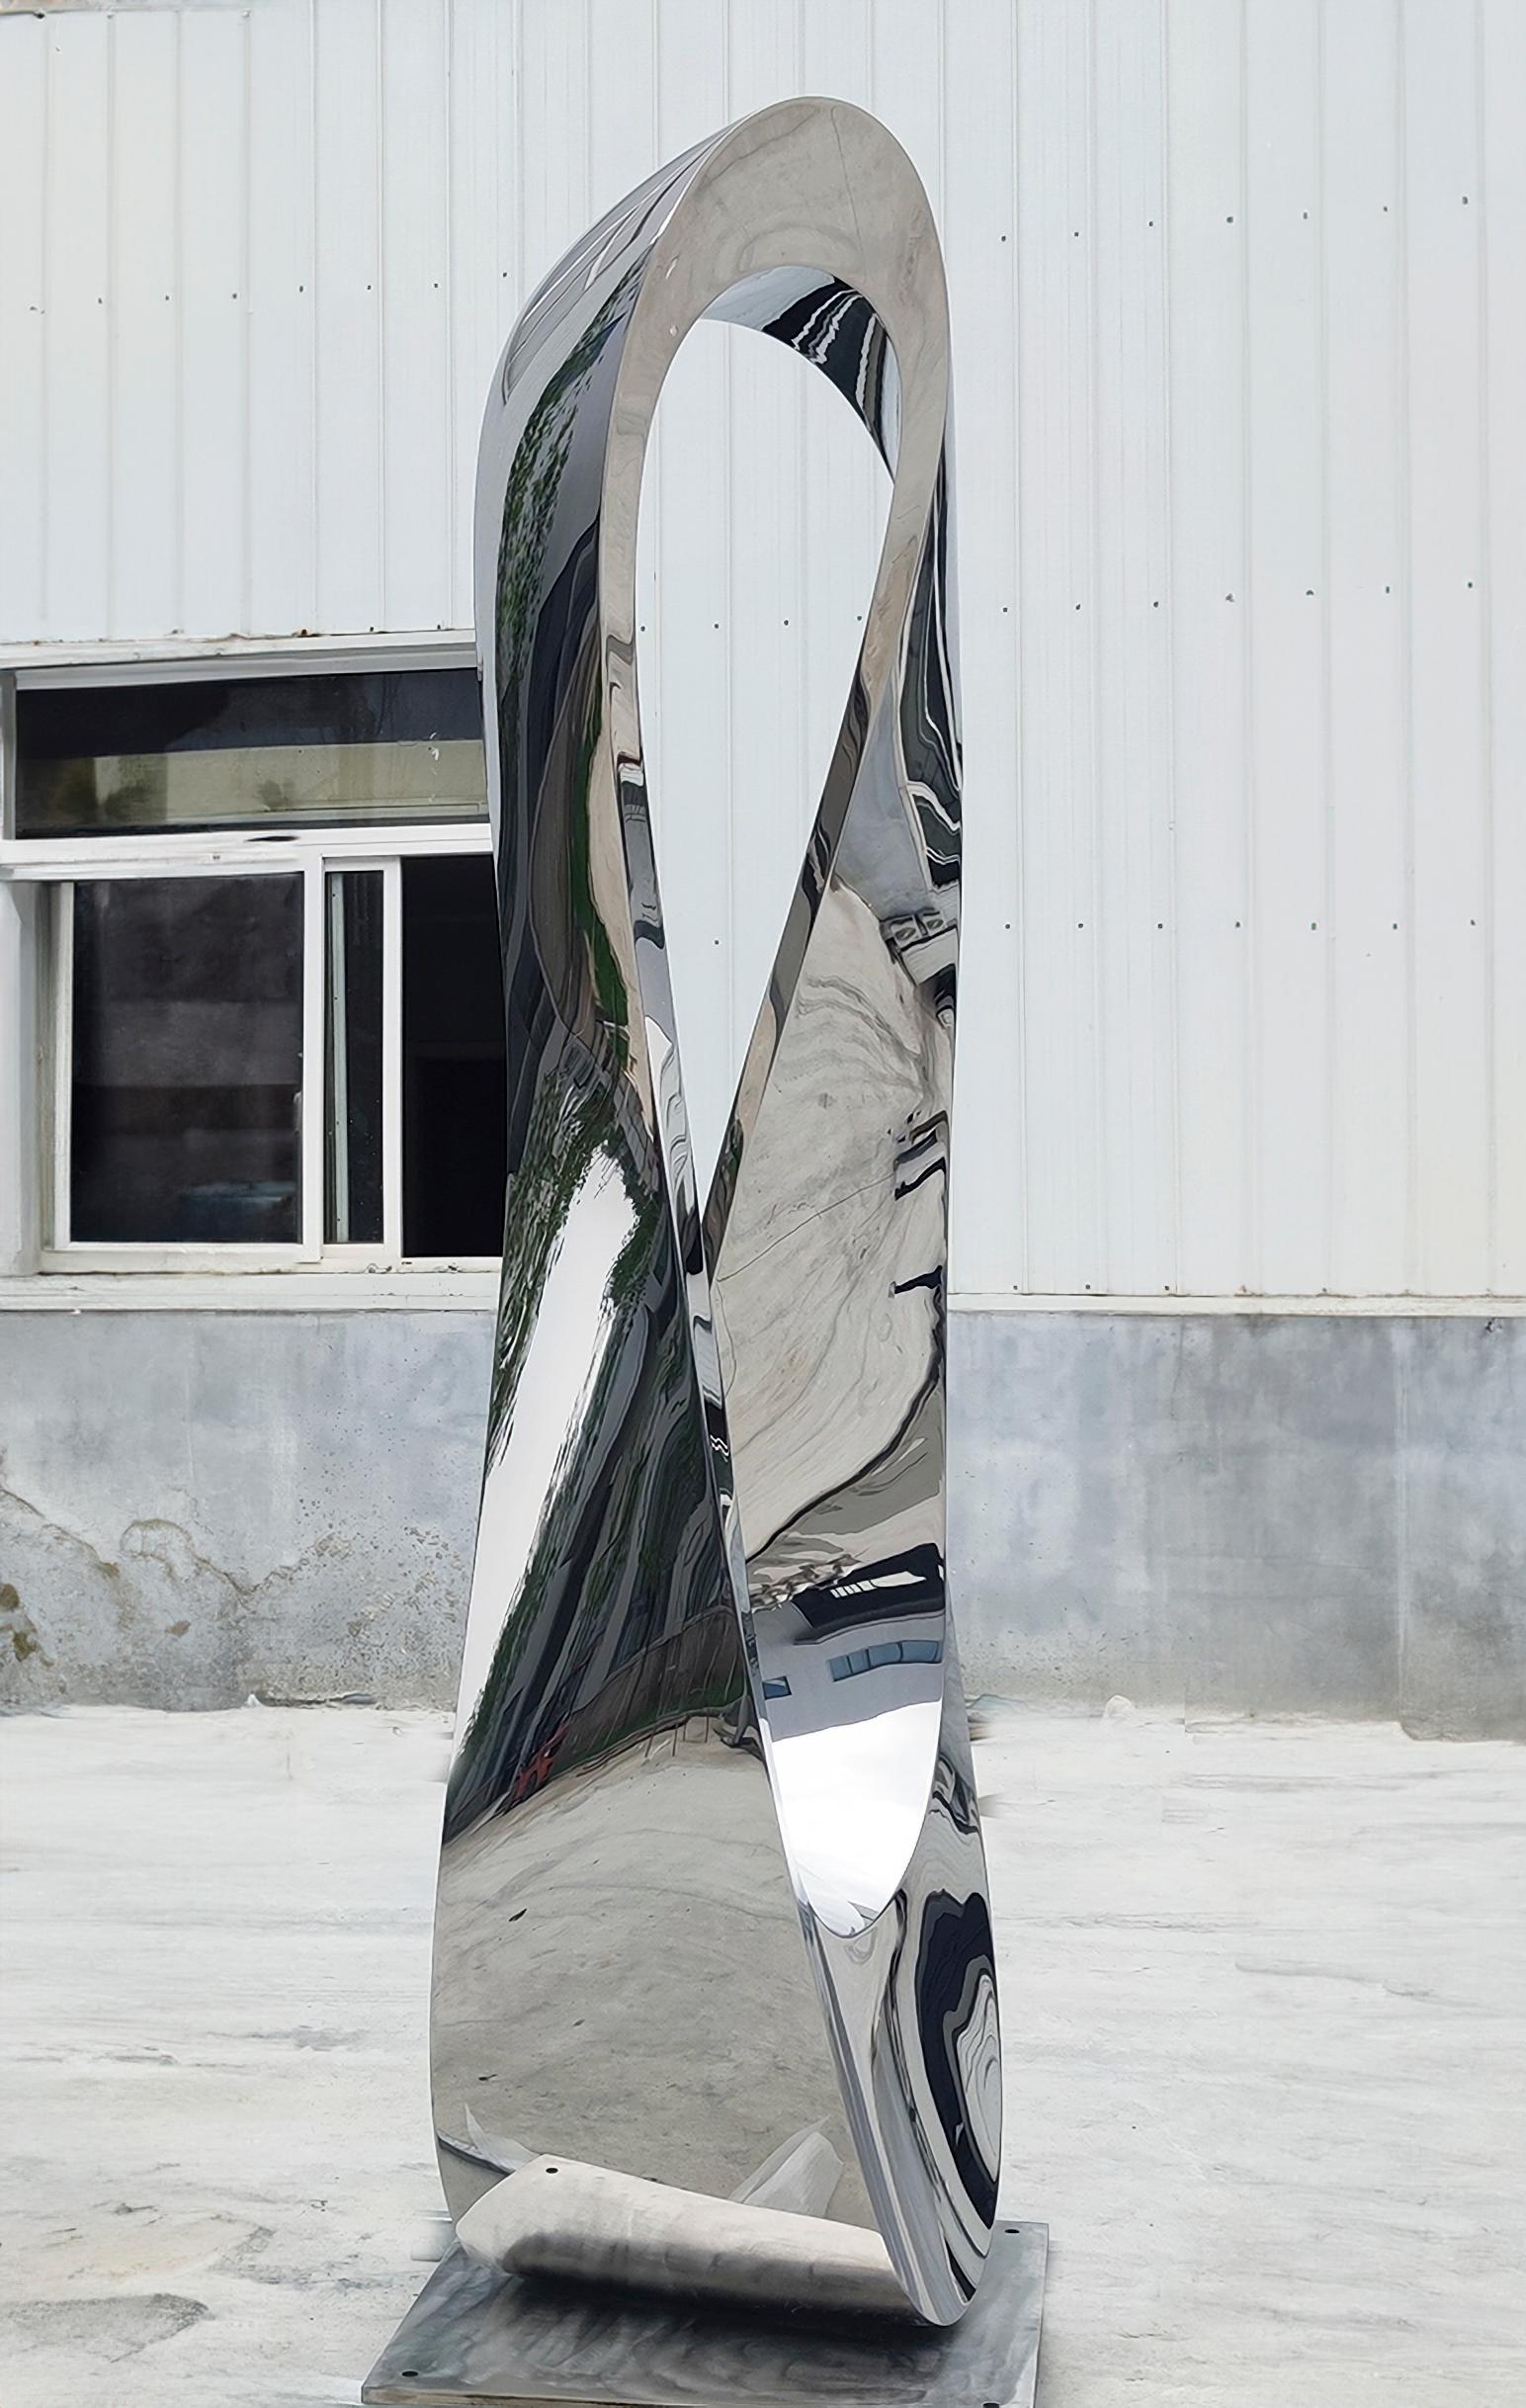 Mobius H9 SS 2/50 - large, abstract, polished stainless steel, outdoor sculpture - Sculpture by Jeremy Guy